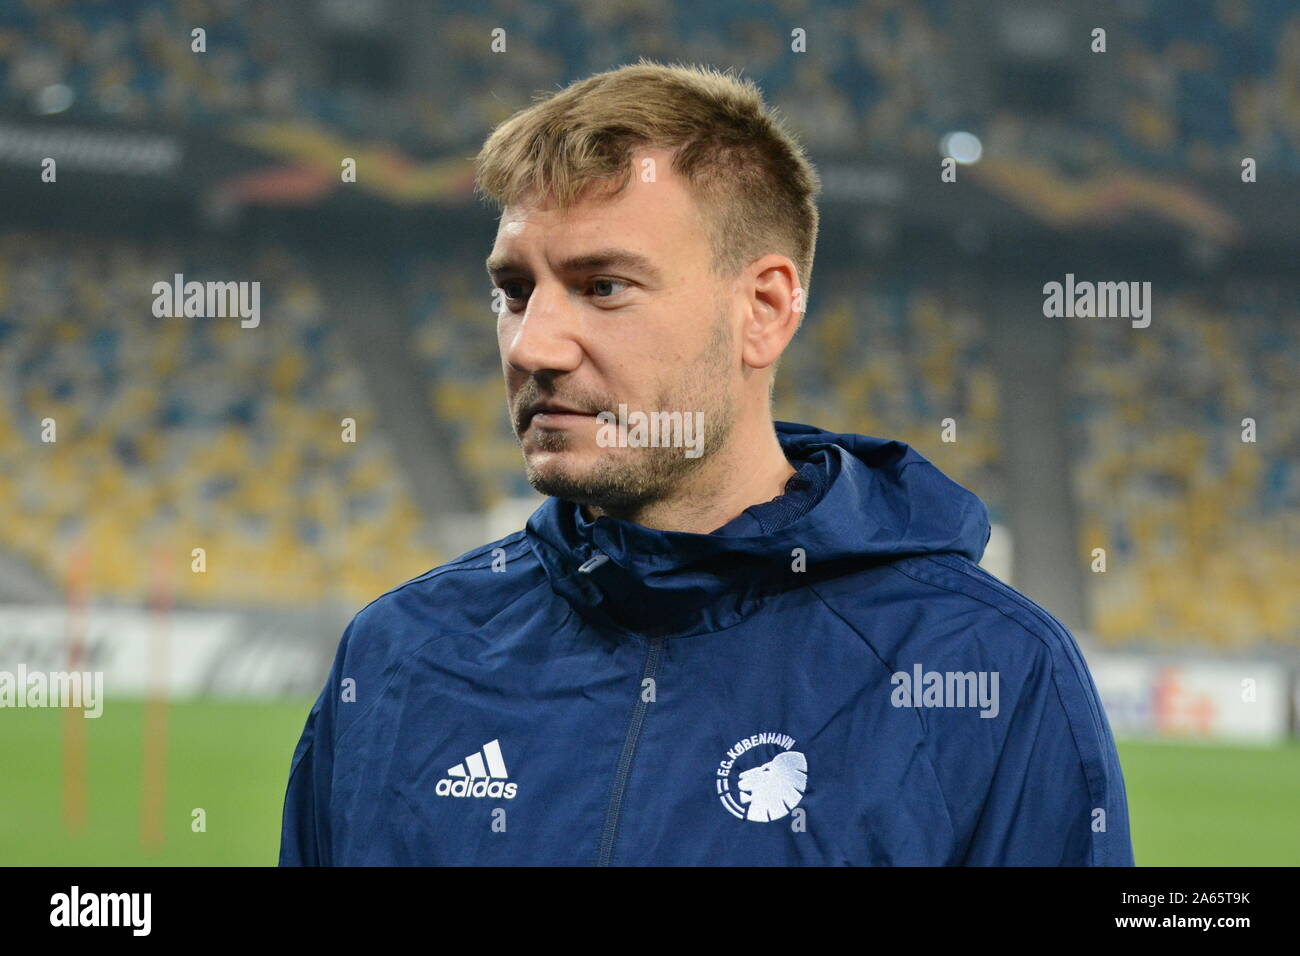 Kiev, Ukraine. 23rd Oct, 2019. KYIV, UKRAINE - OCTOBER 23, 2019: Nicklas Bendtner player F.C. Copenhagen speaks during a press conference before FC Dynamo with F.C. Copenhagen in the UEFA Europa League at the Olympic stadium (Photo by Aleksandr Gusev/Pacific Press) Credit: Pacific Press Agency/Alamy Live News Stock Photo